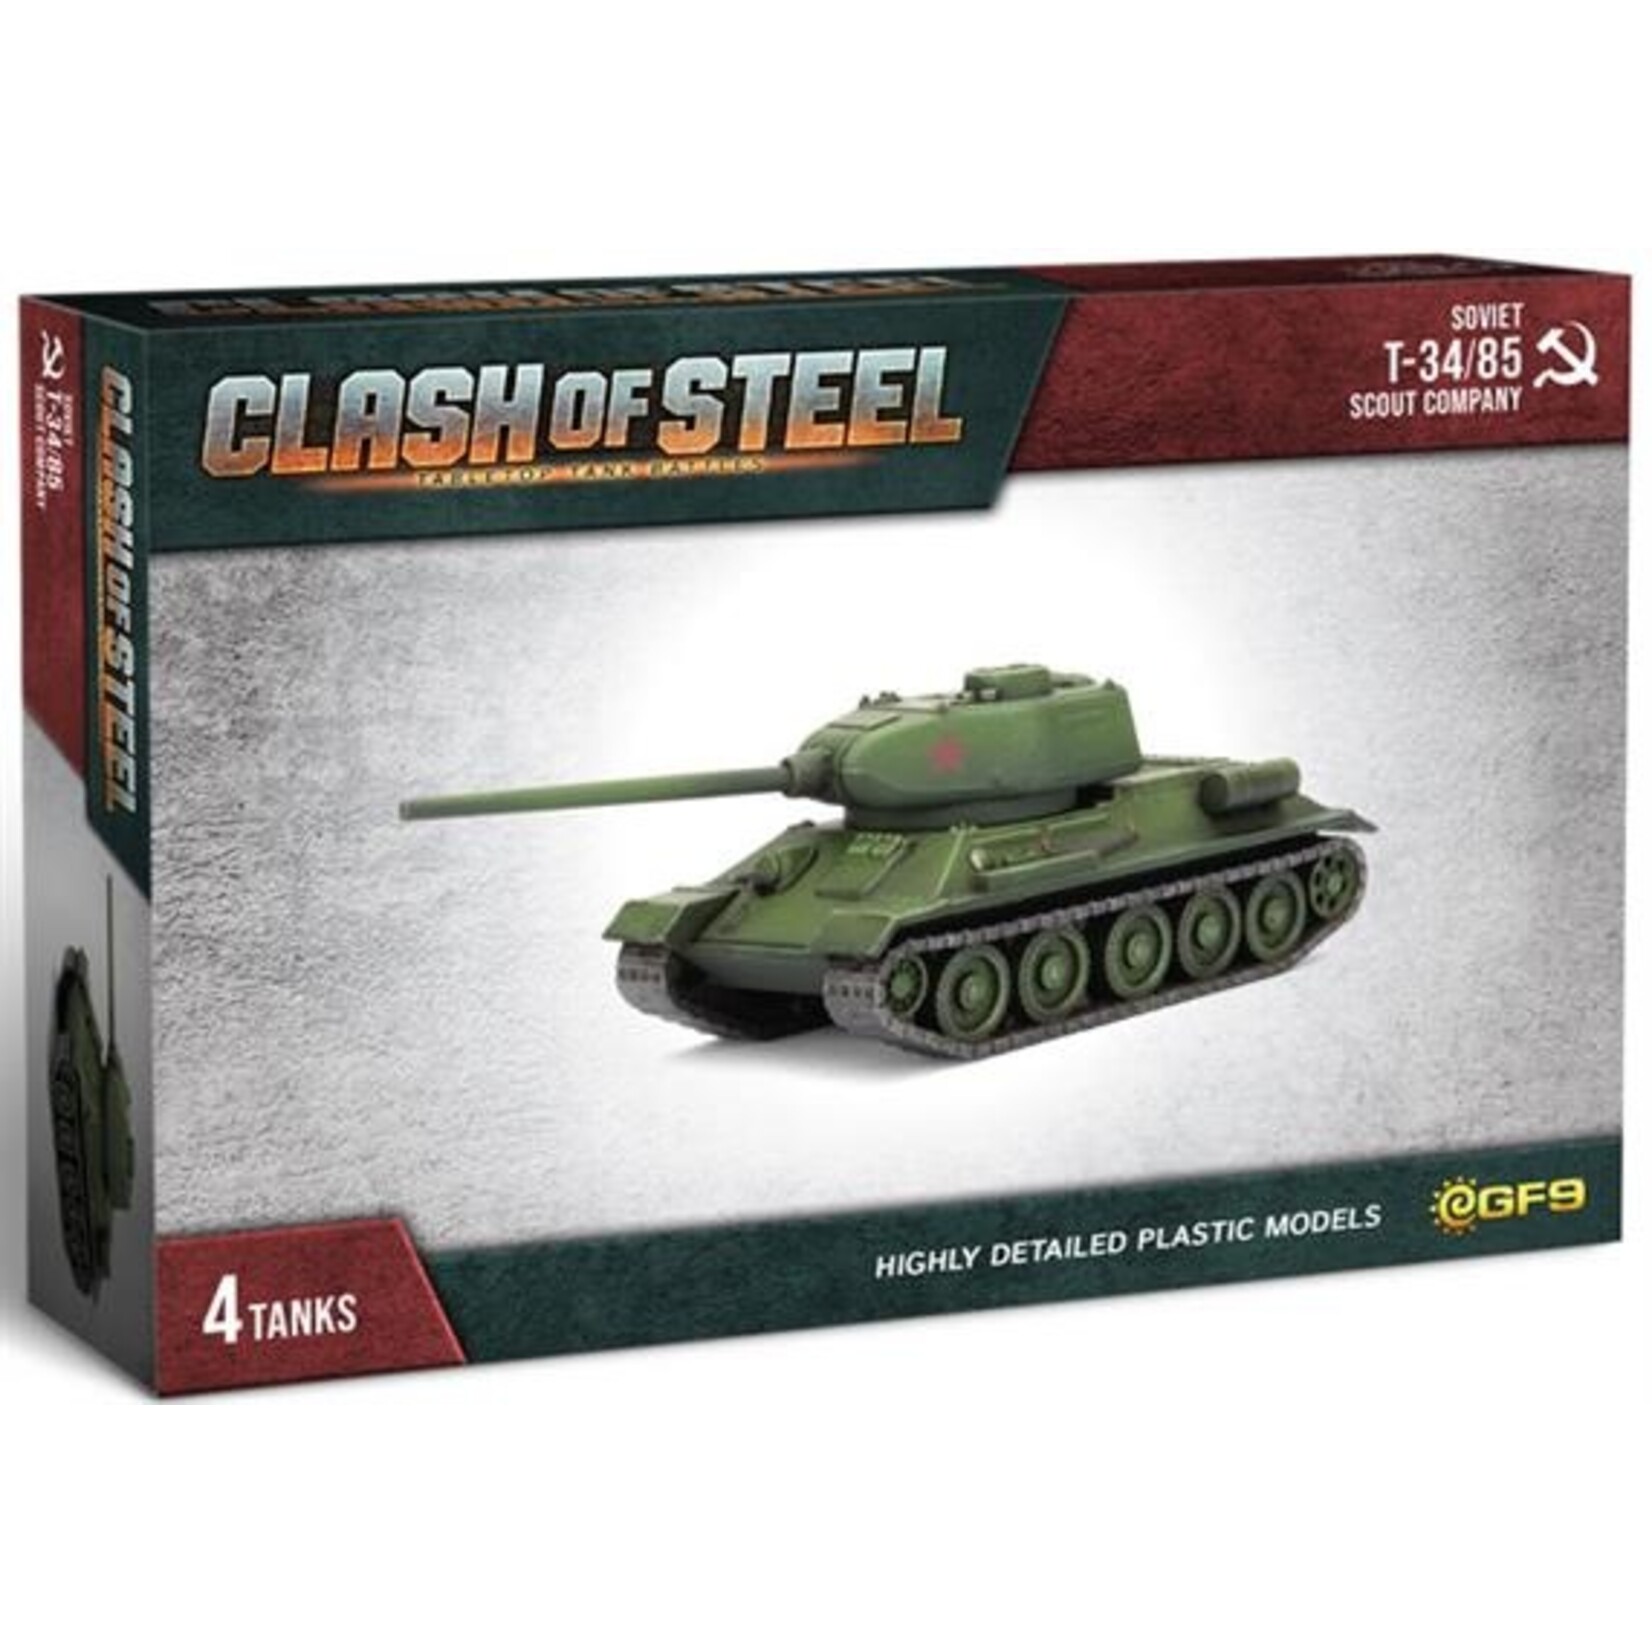 Clash Of Steel Soviet T-34/85 Scout Company